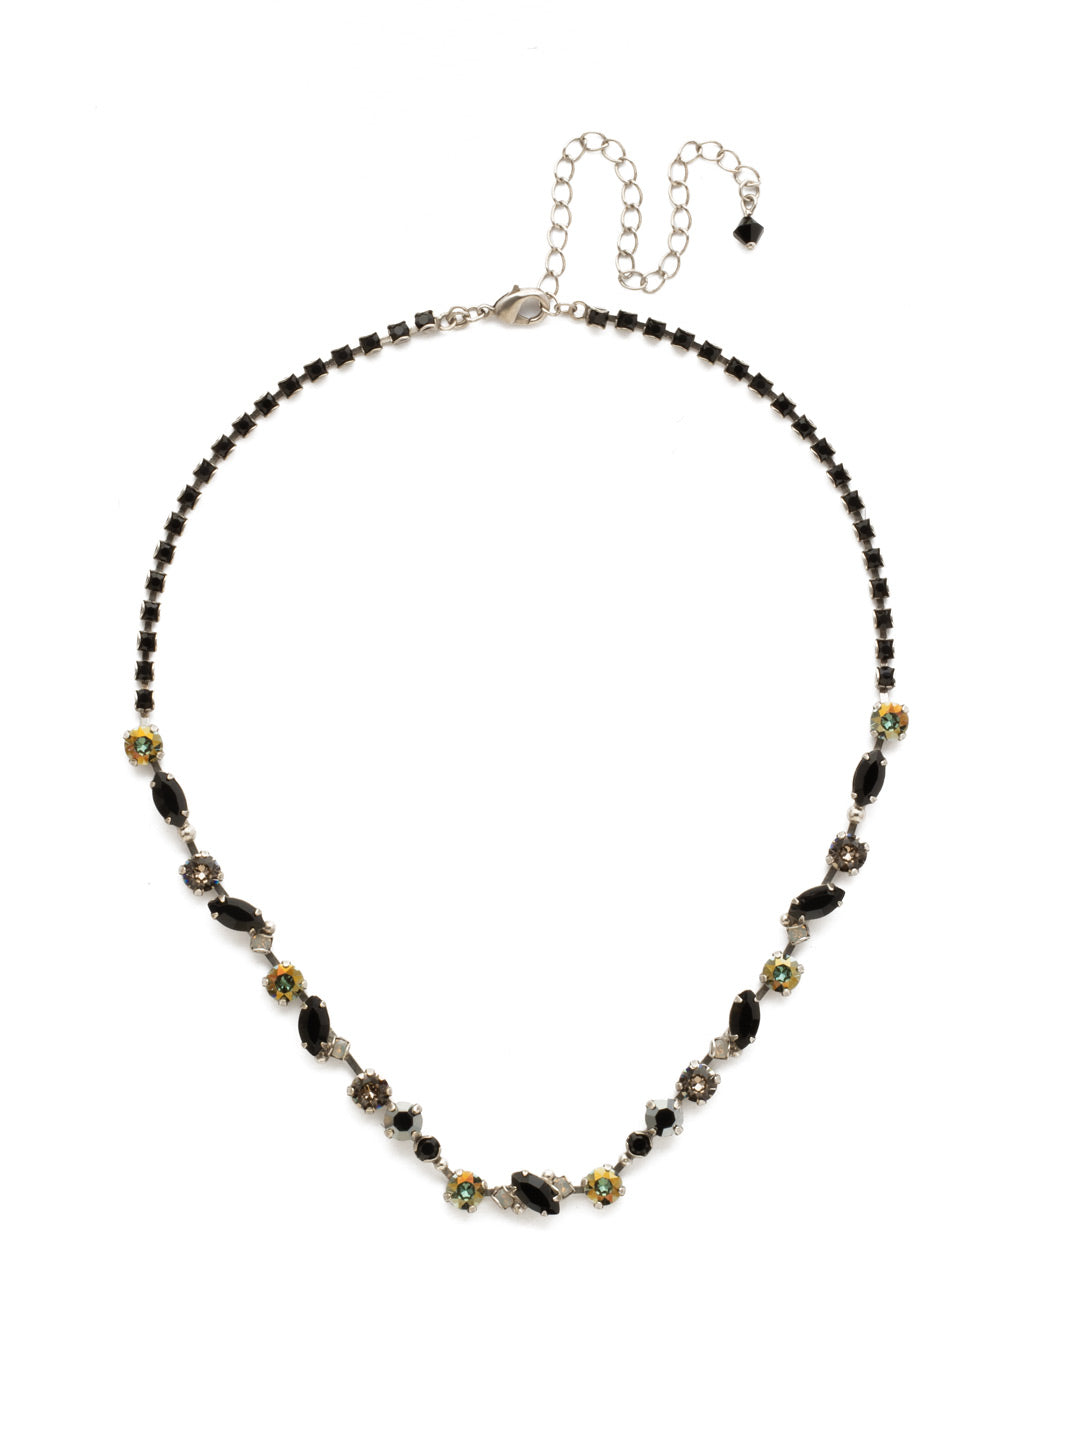 Simply Stated Tennis Necklace - NDN1ASBON